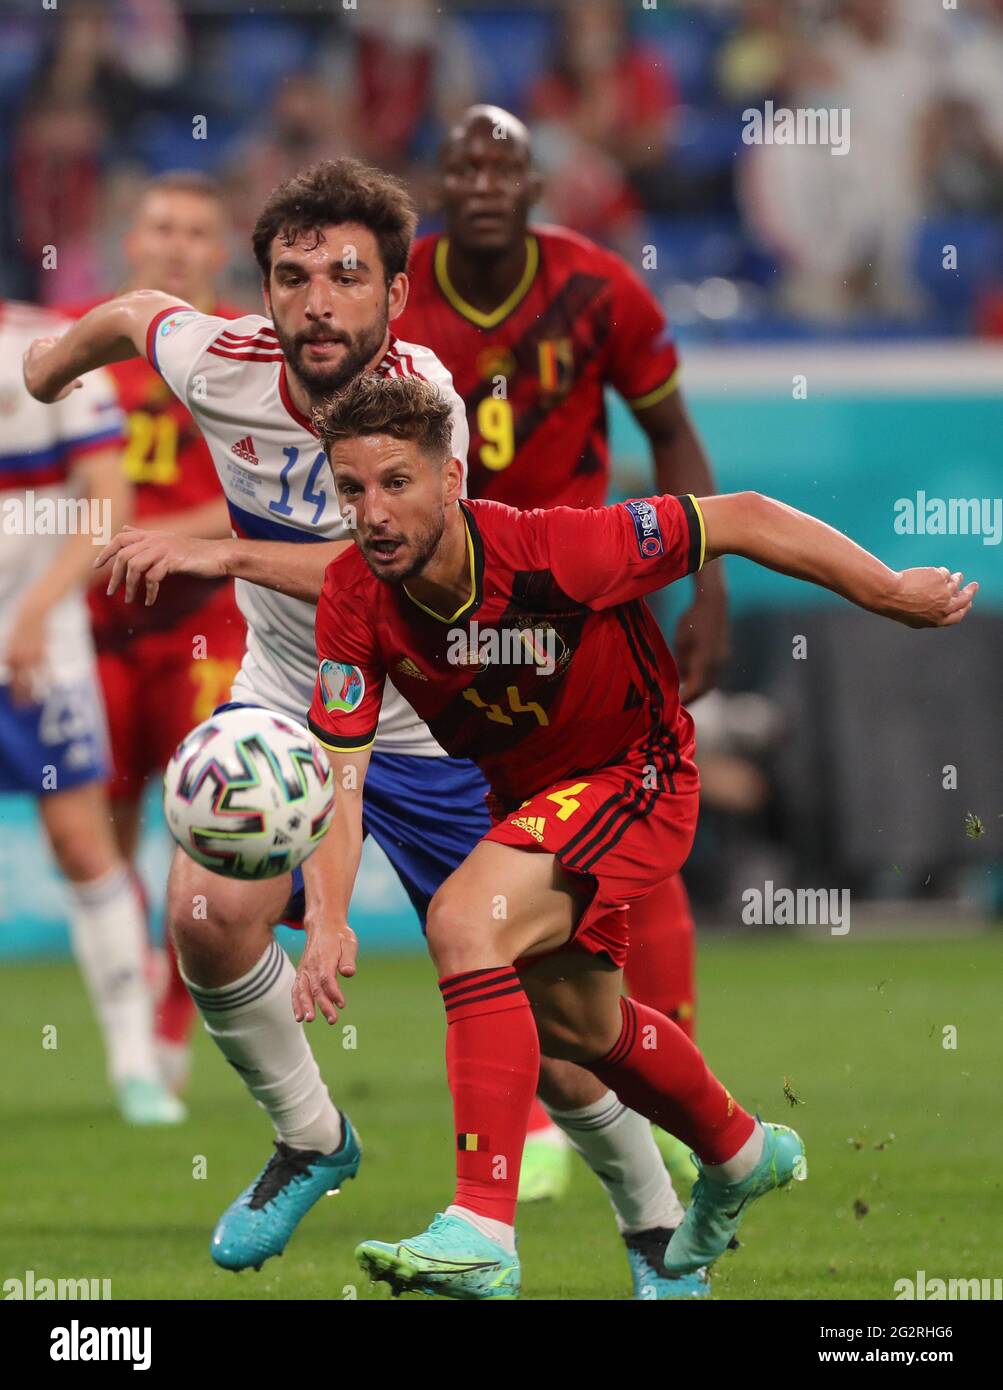 12 June 2021, Russia, St. Petersburg: Football: European Championship, Belgium - Russia, preliminary round, Group B, matchday 1 at St. Petersburg Stadium. Georgi Dzhikia (Russia) and Dries Mertens (Belgium, r) in action. Important: For editorial news reporting purposes only. Not used for commercial or marketing purposes without prior written approval of UEFA. Images must appear as still images and must not emulate match action video footage. Photographs published in online publications (whether via the Internet or otherwise) shall have an interval of at least 20 seconds between the posting. Ph Stock Photo